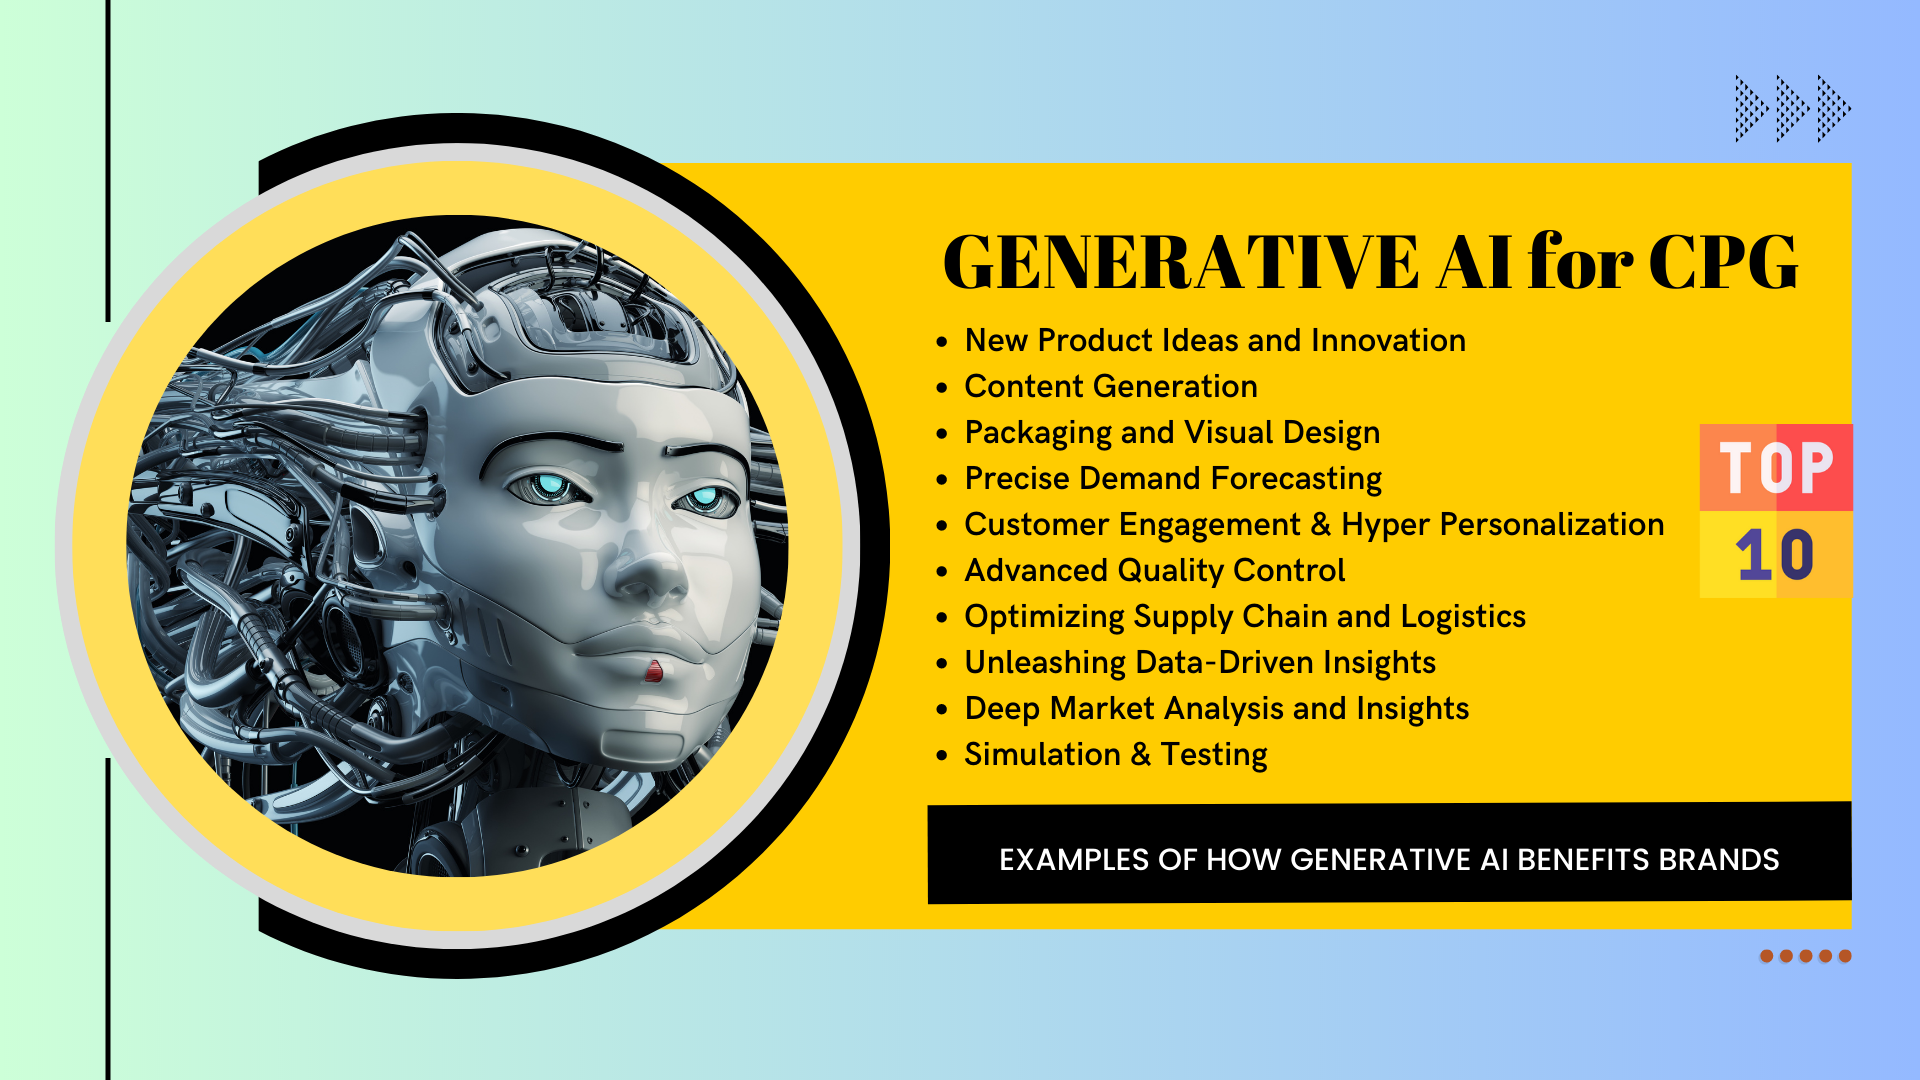 Generative AI for CPG brands